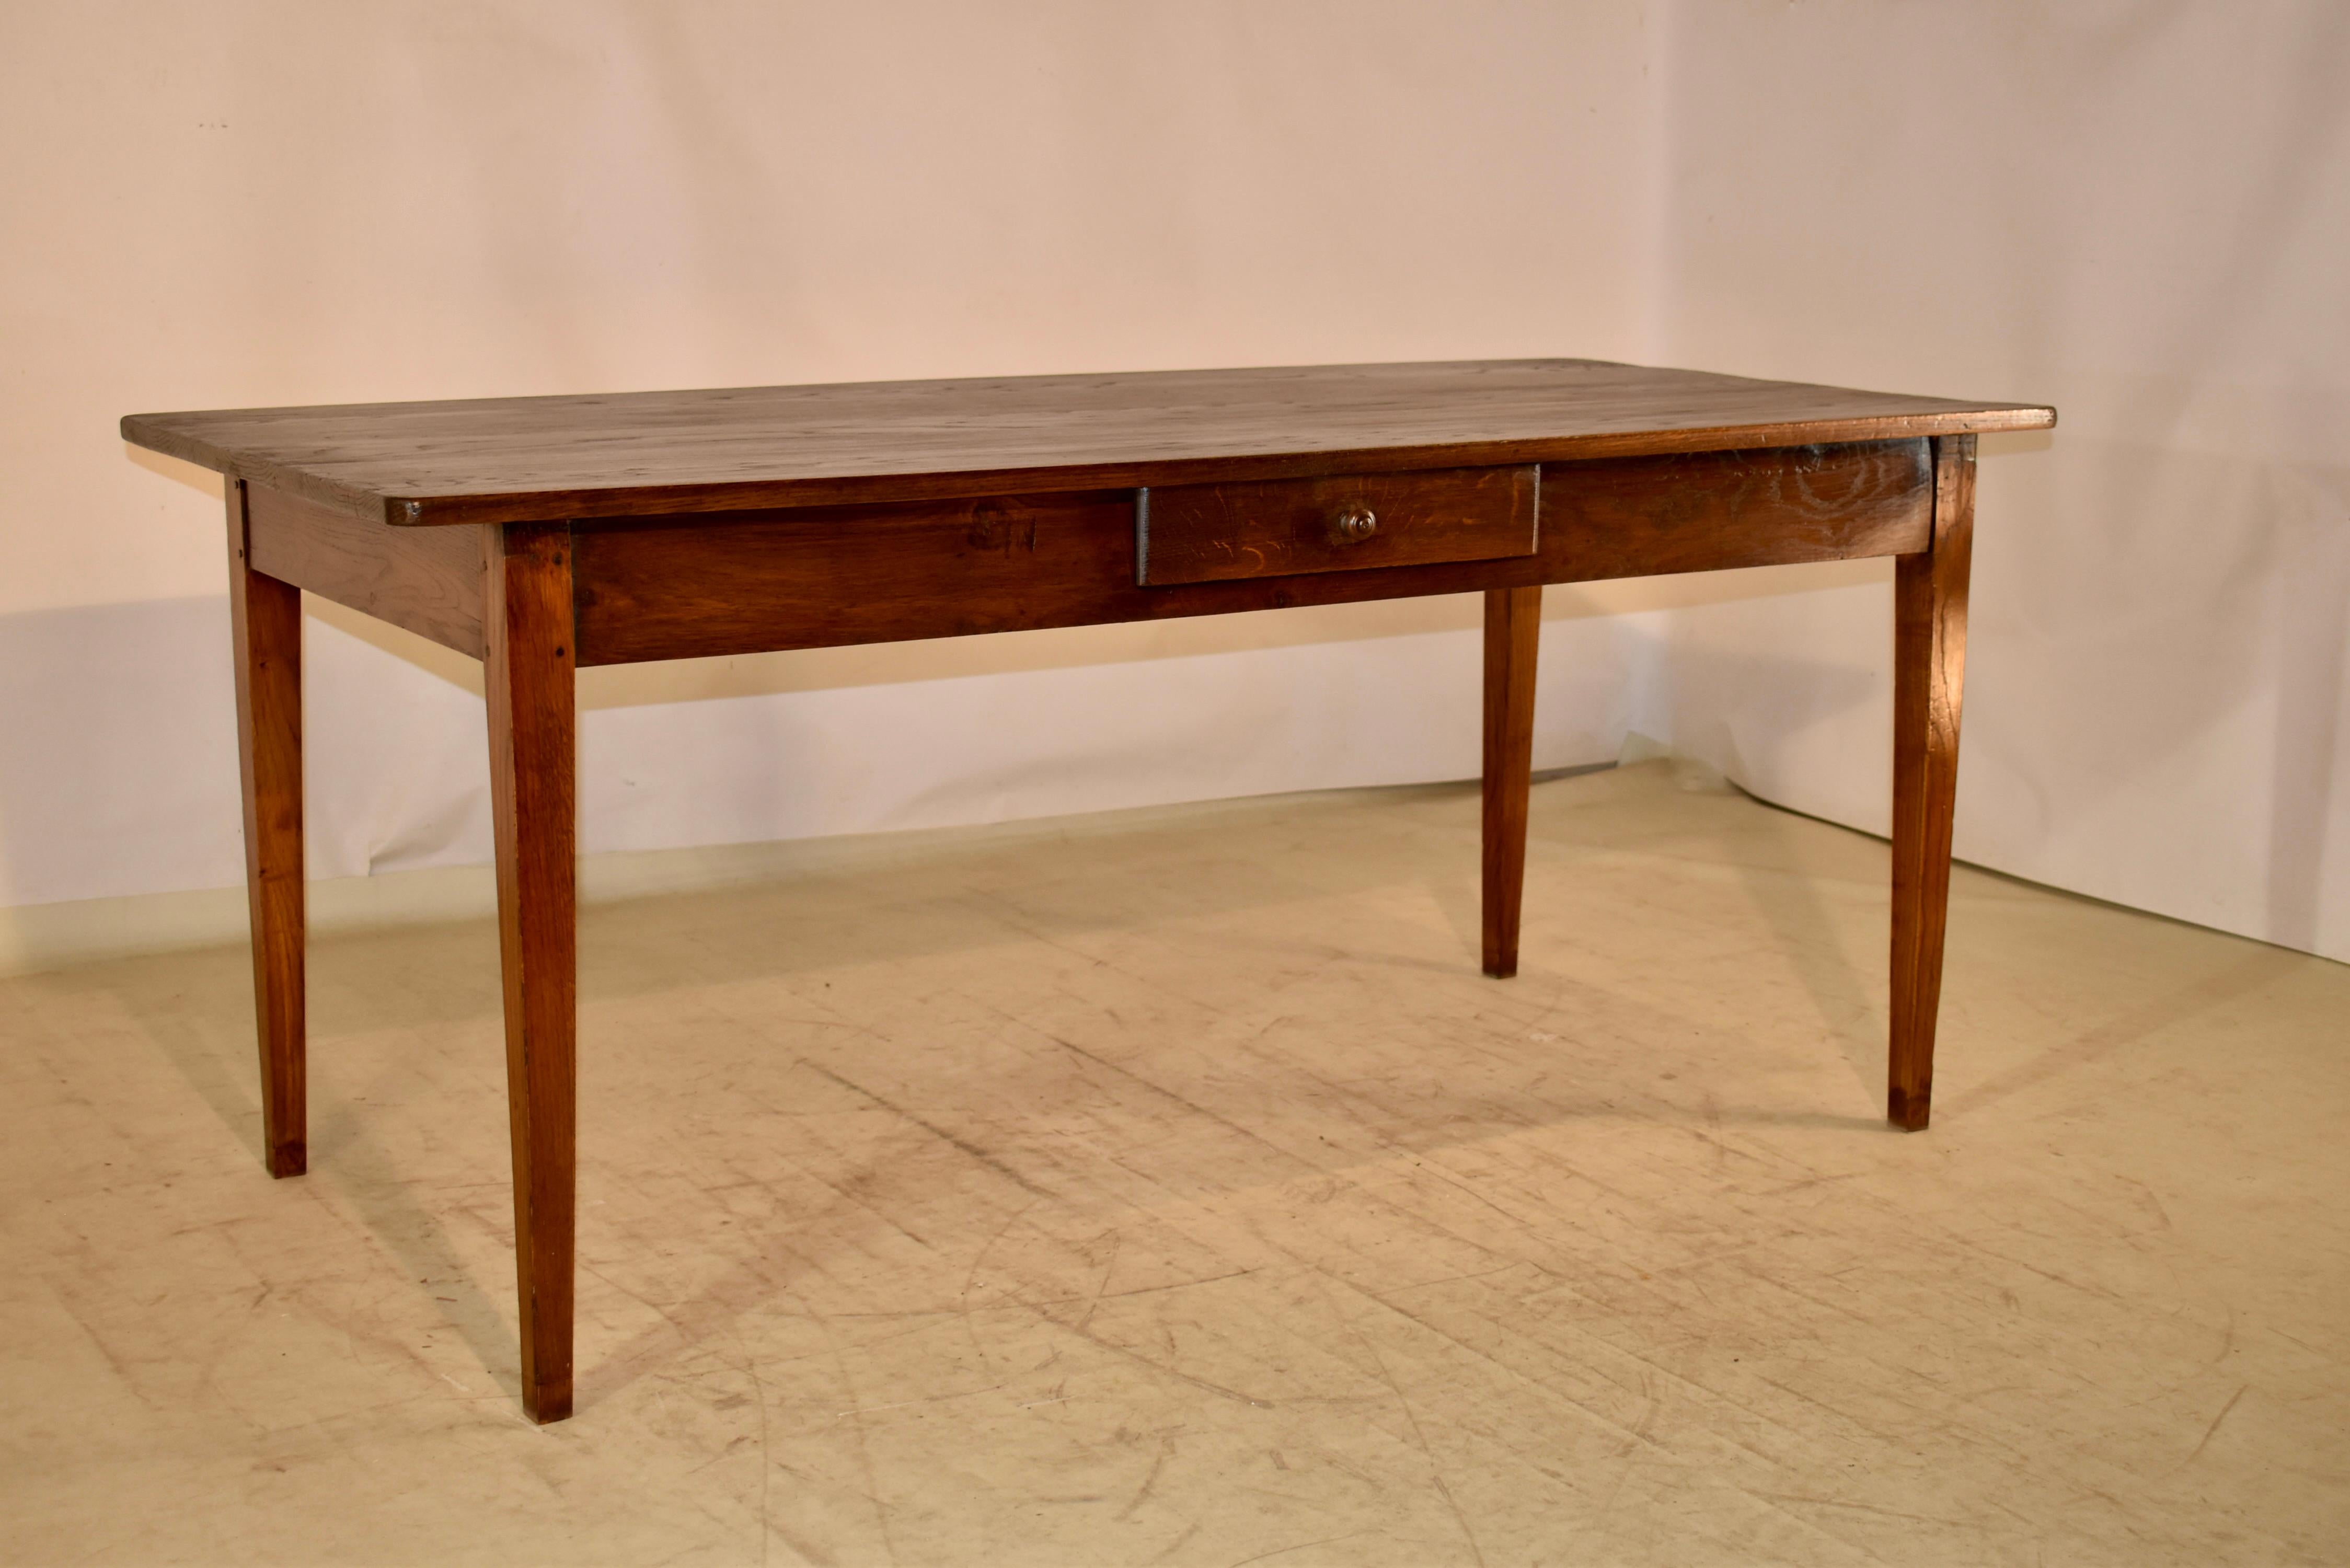 18th century farm table from France and made from Chestnut.  The top is wonderfully grained, and follows down to a simple apron.  The apron contains a single drawer and the table is supported on hand tapered legs.  The apron height is 25 inches.